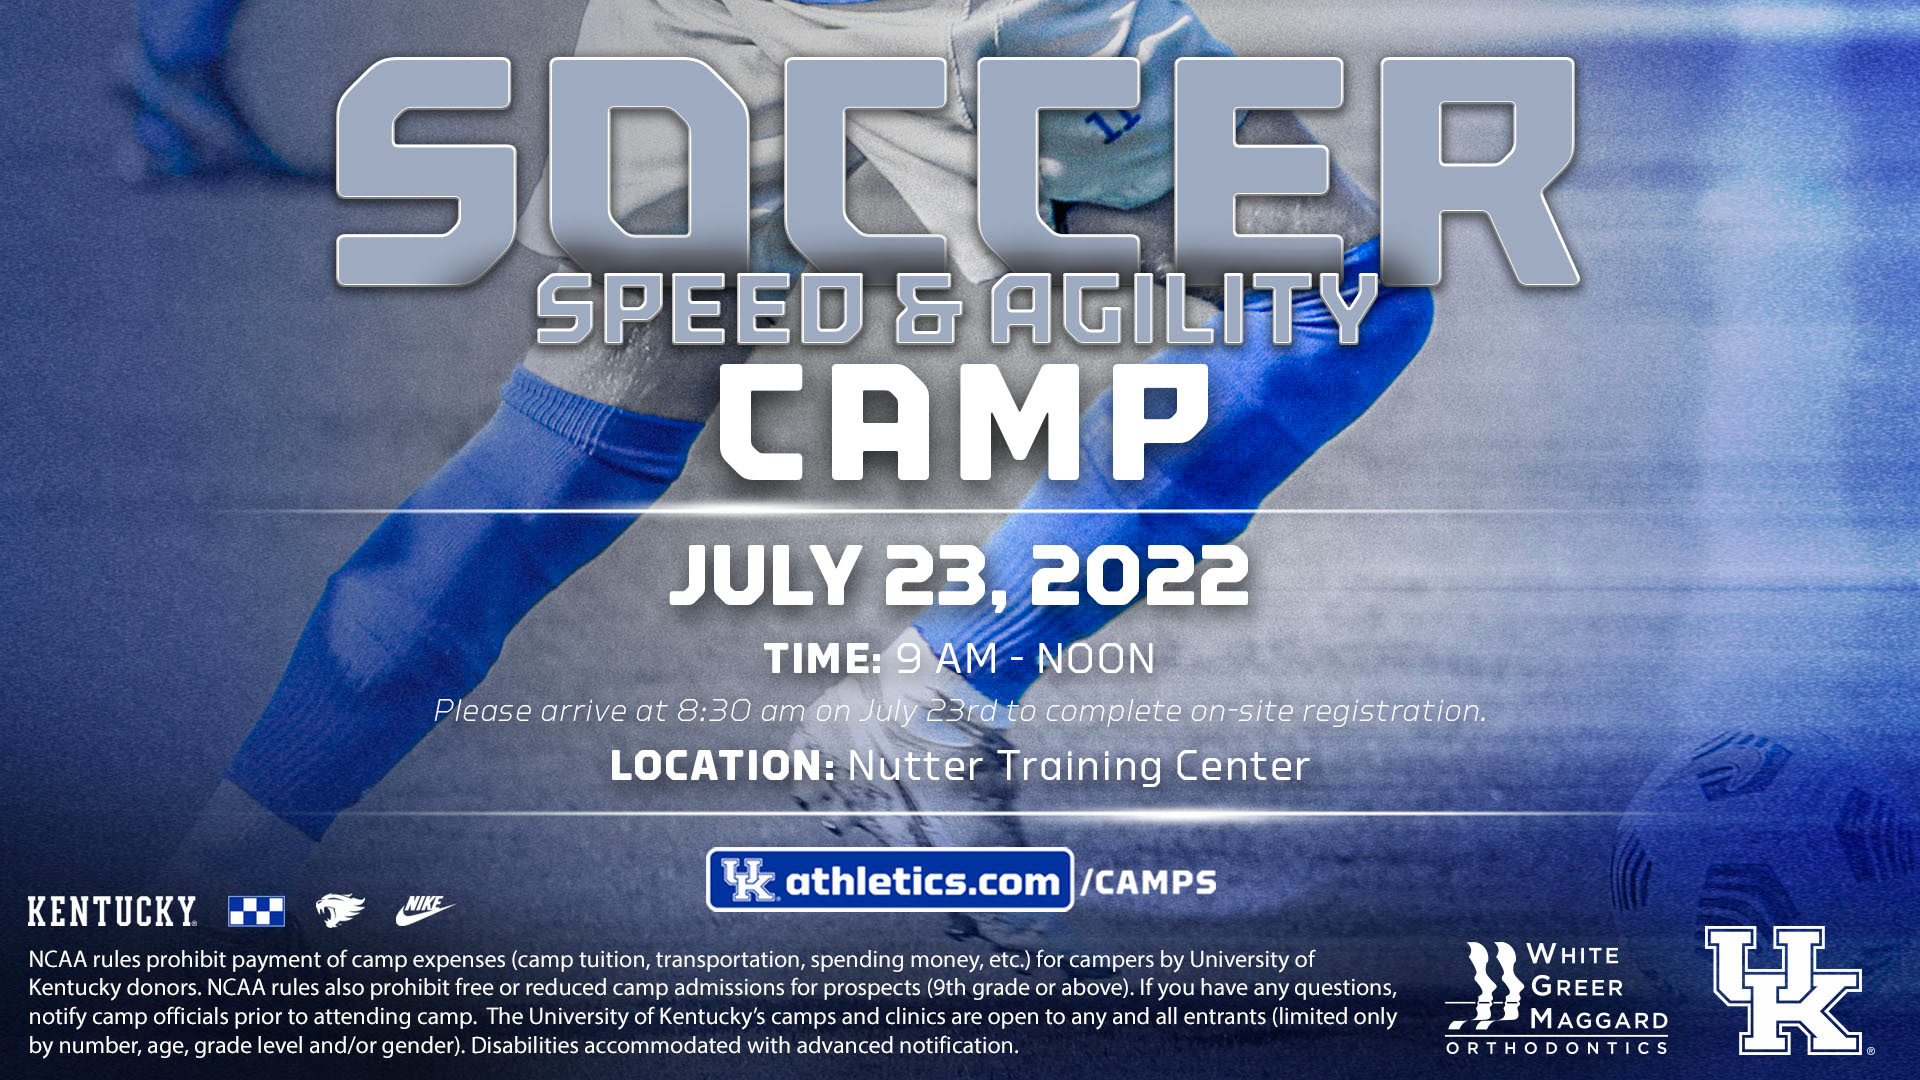 Kentucky Soccer Speed and Agility Camp